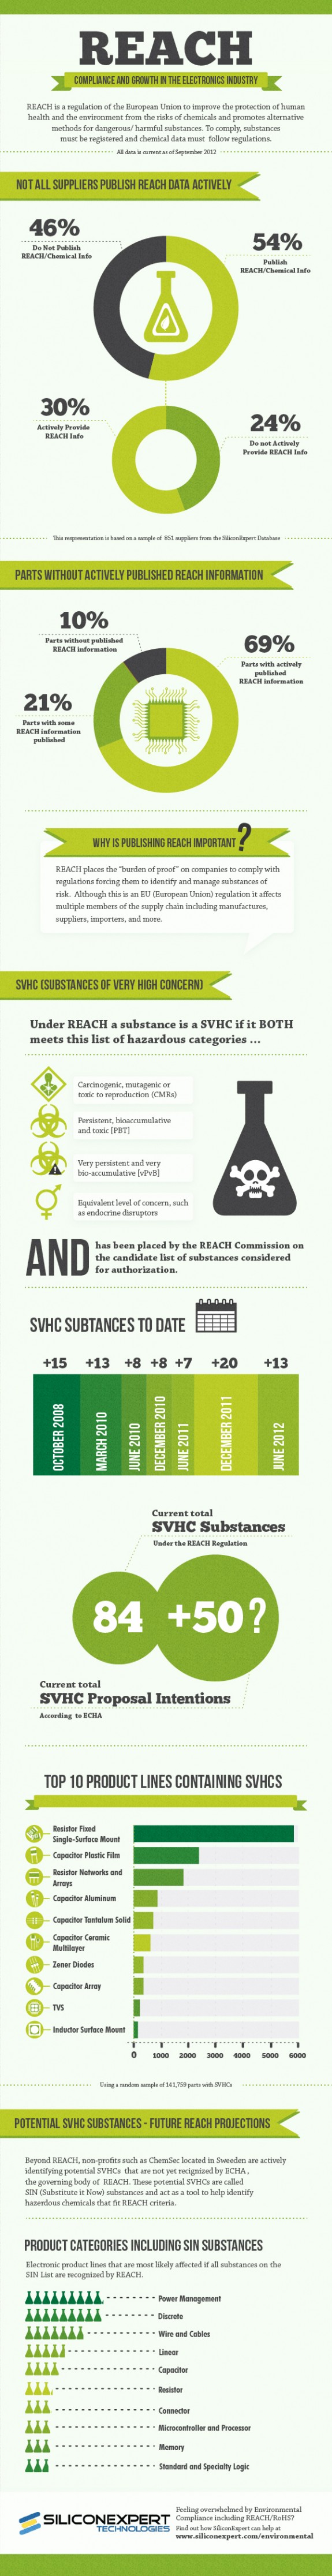 Infographic for Reach:An Infographic On the Electronics Industry